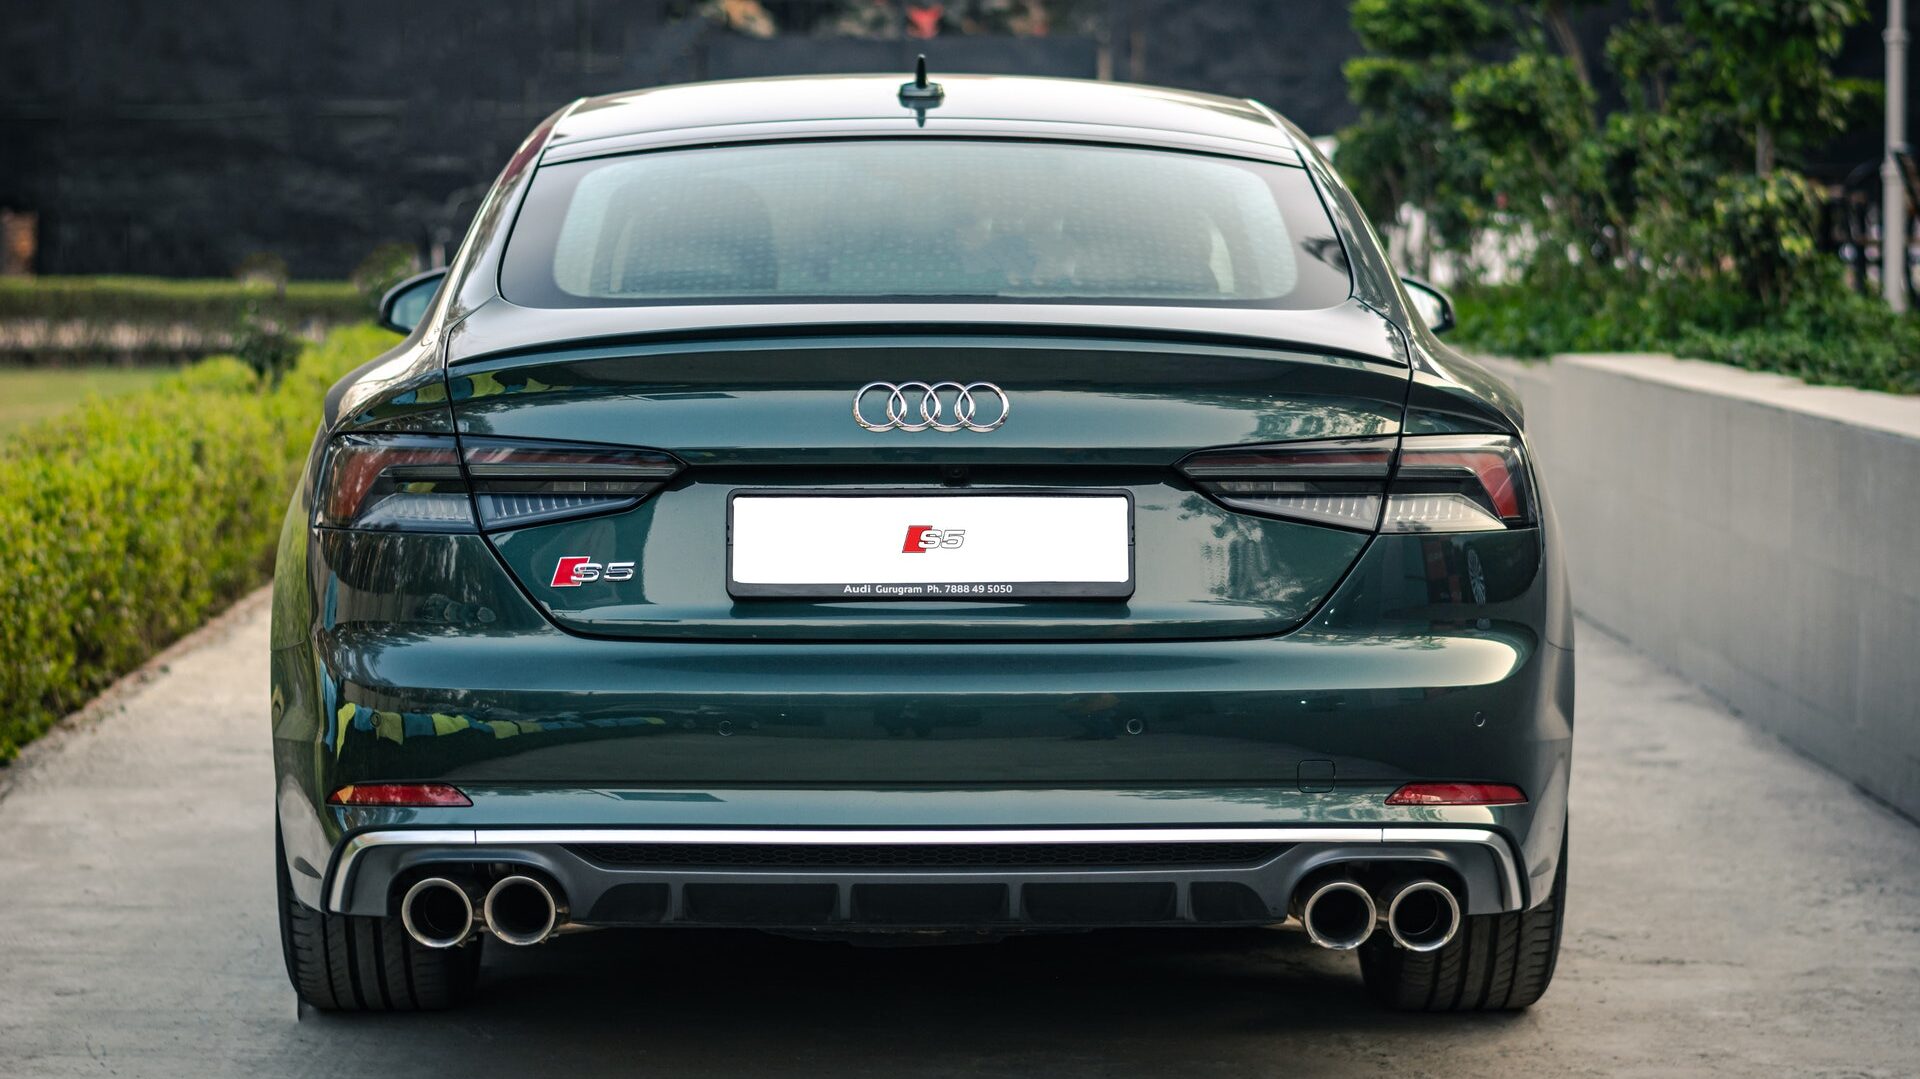 Audi with sport exhaust package